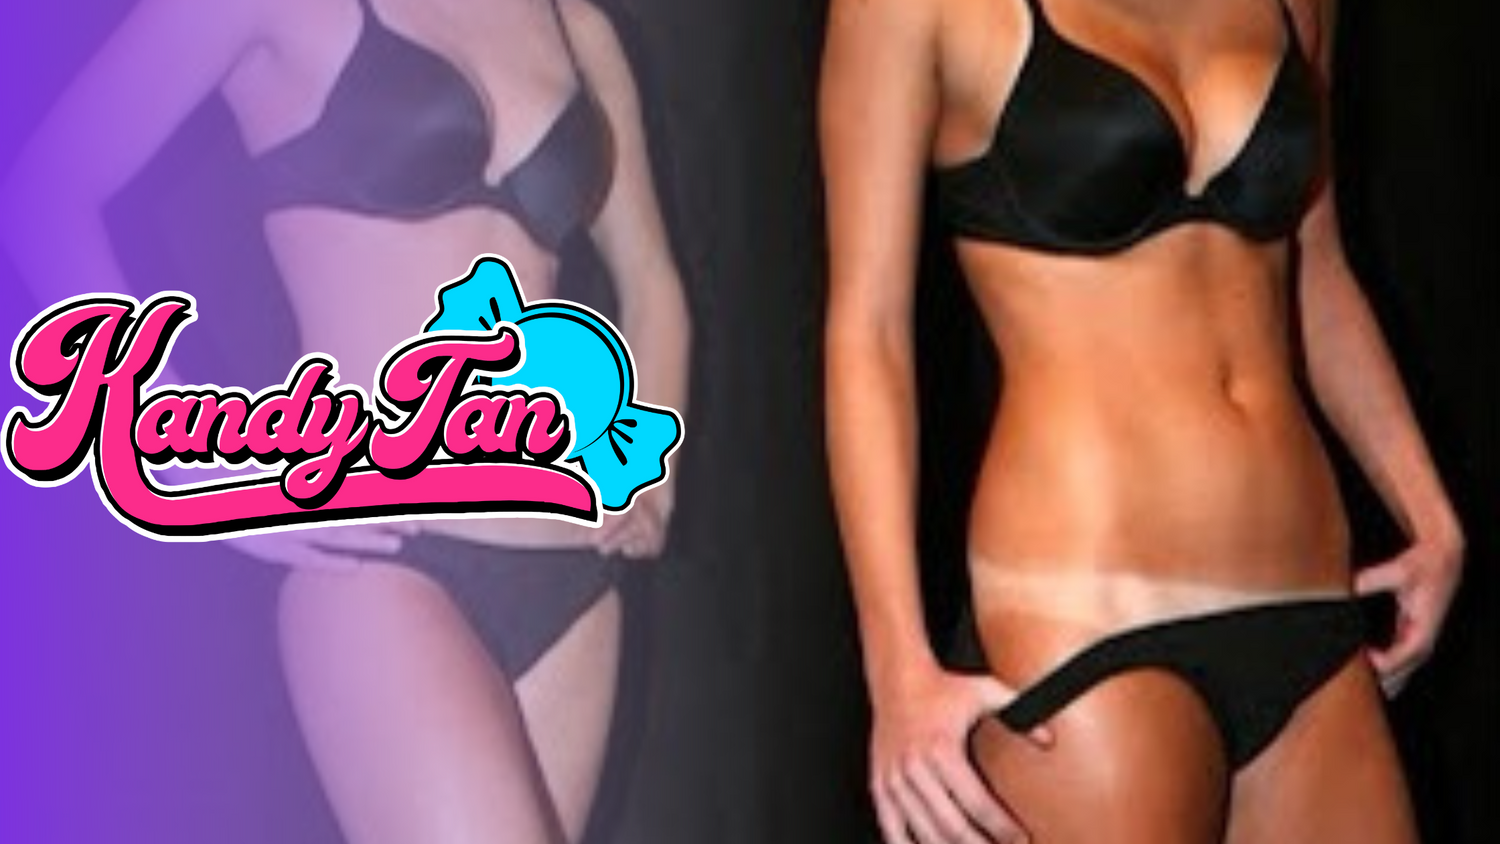 Before and After Using Tanning drops with Kandy tan logo 